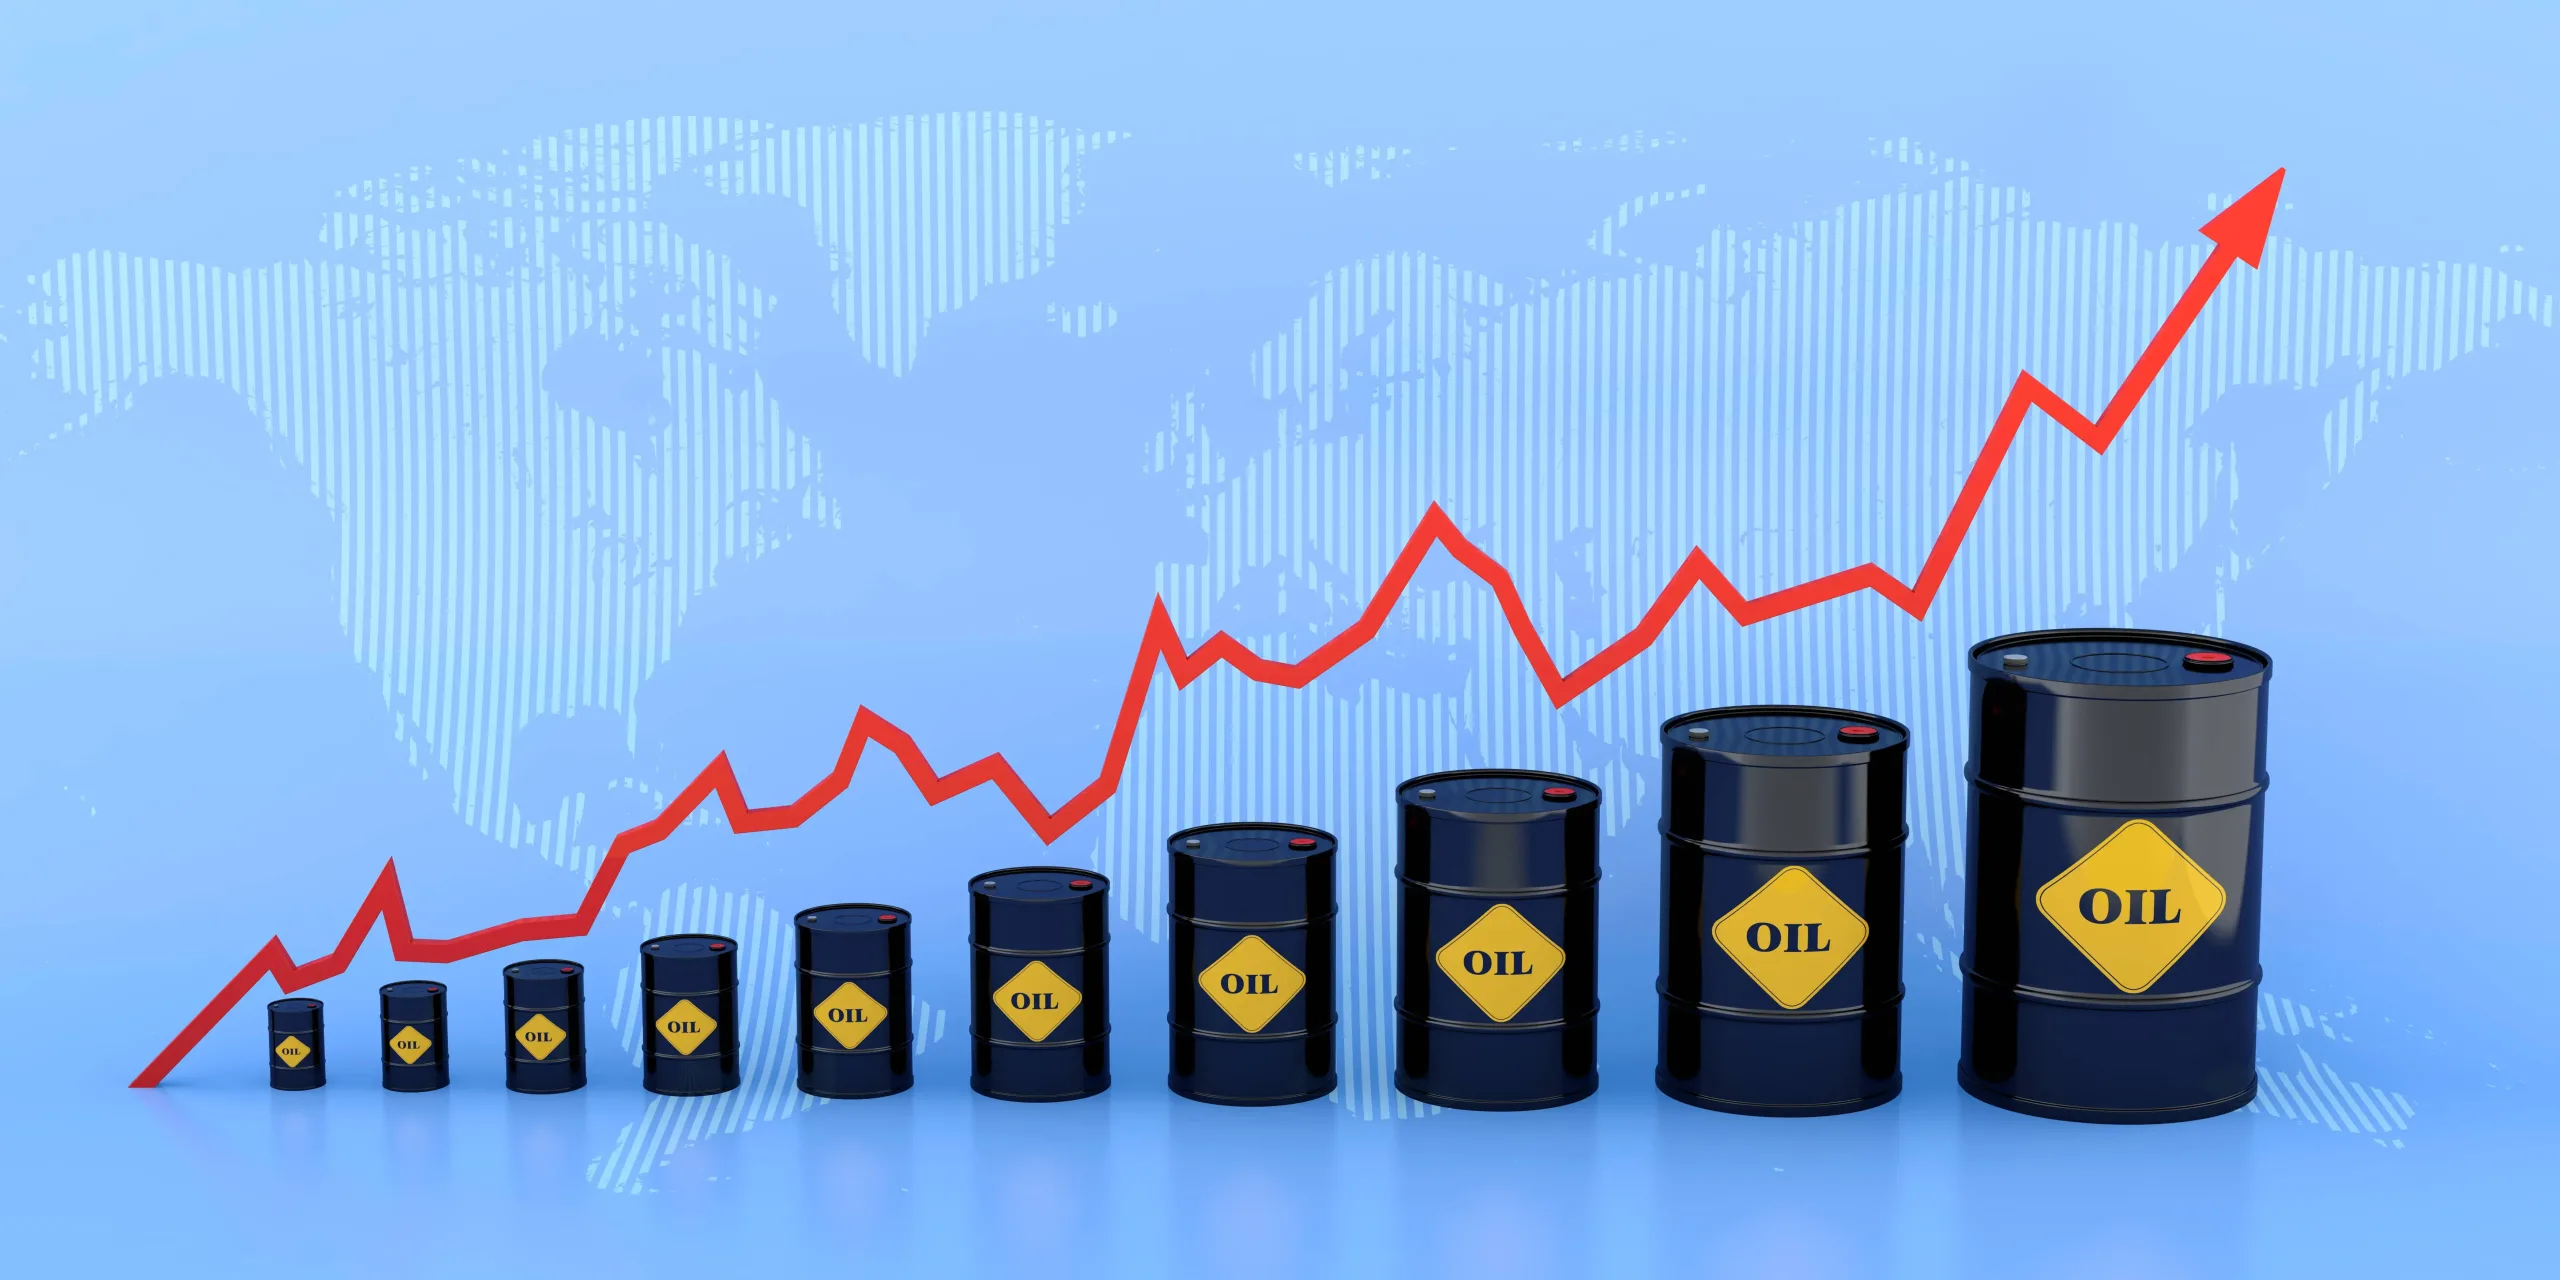 With the publication of US jobs data, the possibility of further growth of crude oil was seen